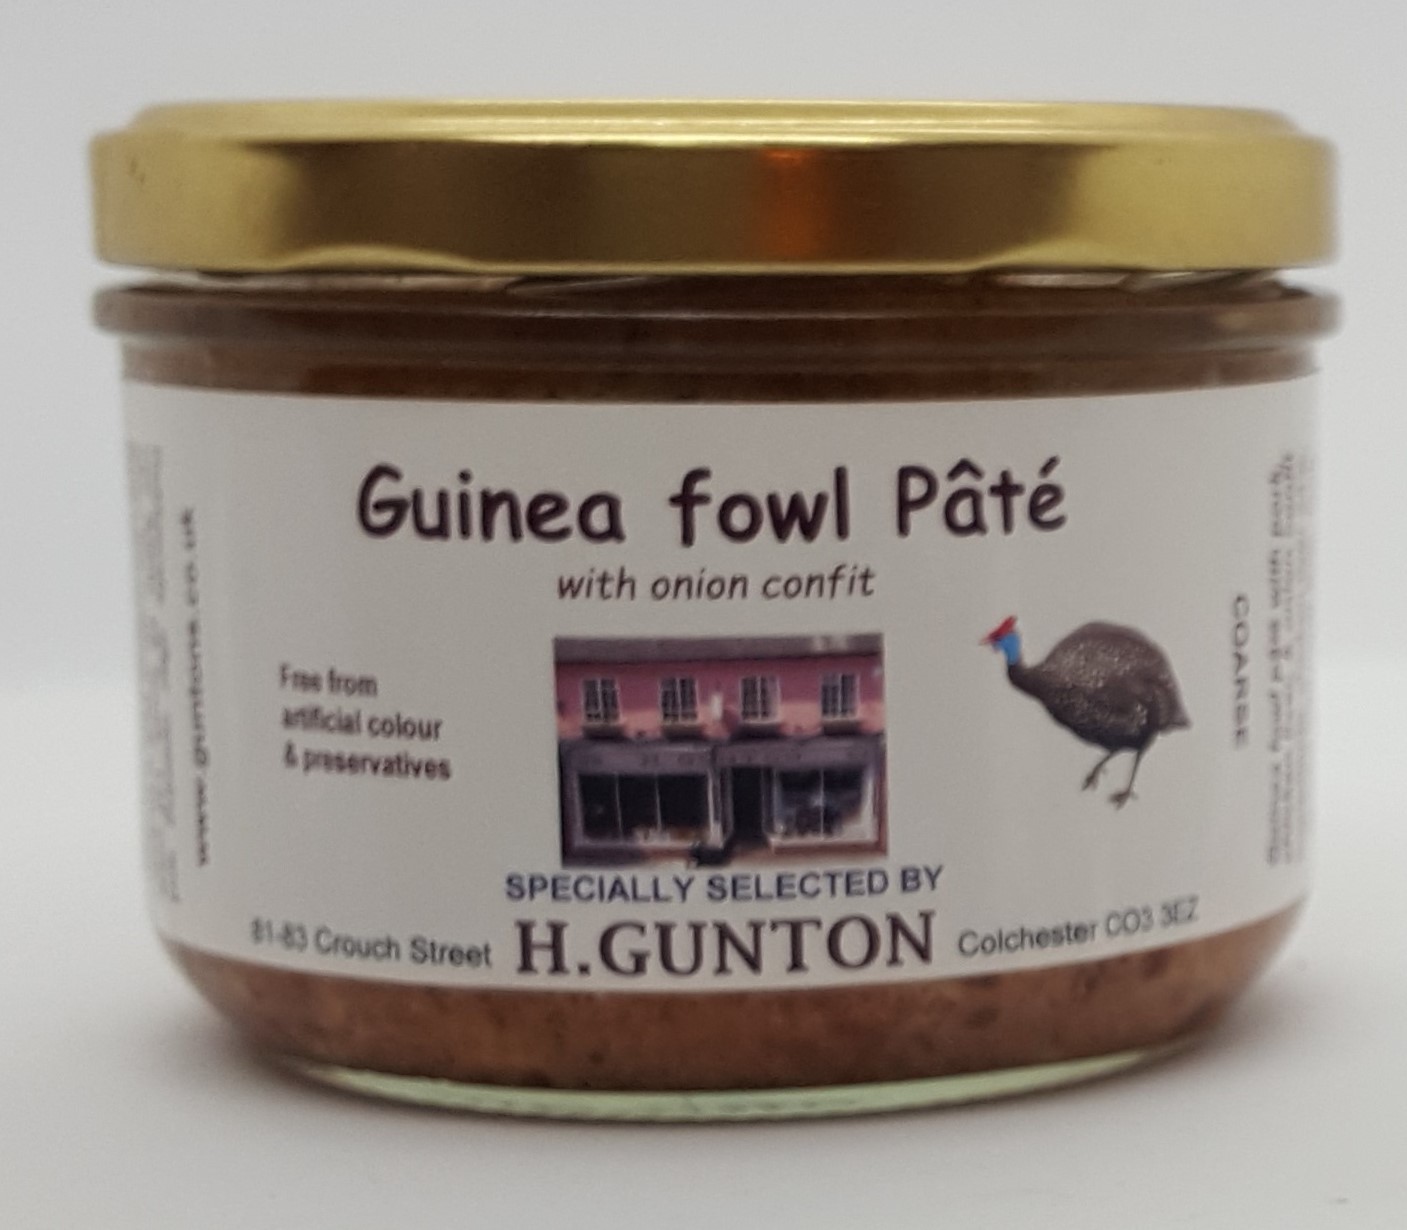 Guinea Fowl Pate with Onion Confit